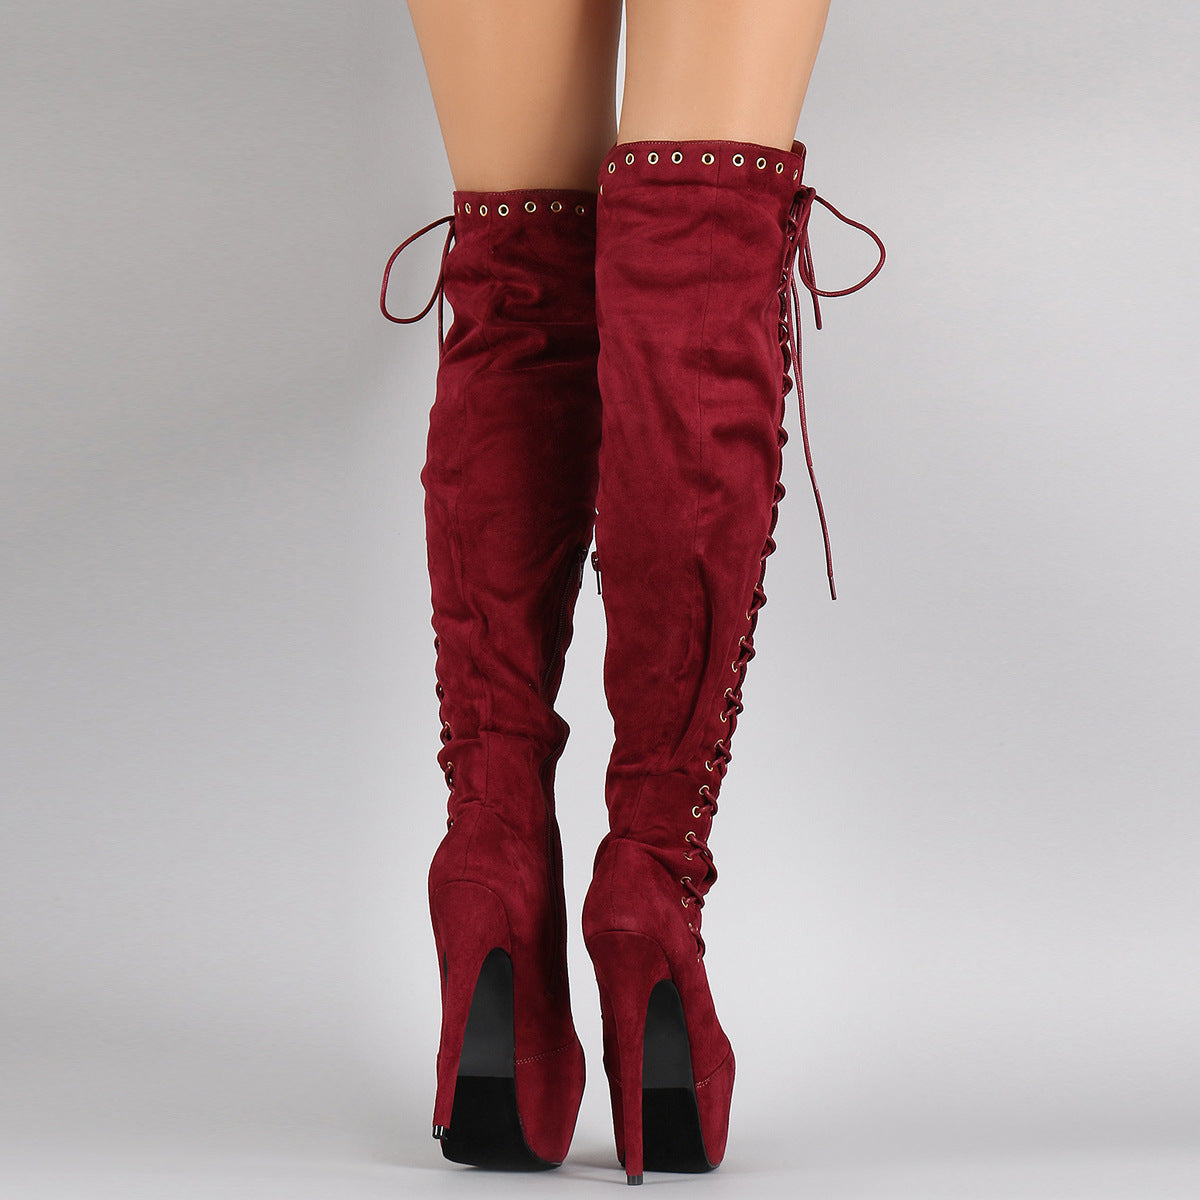 Lace UP Platform Round Toe Super High Stiletto Heel Over the Knee Boots